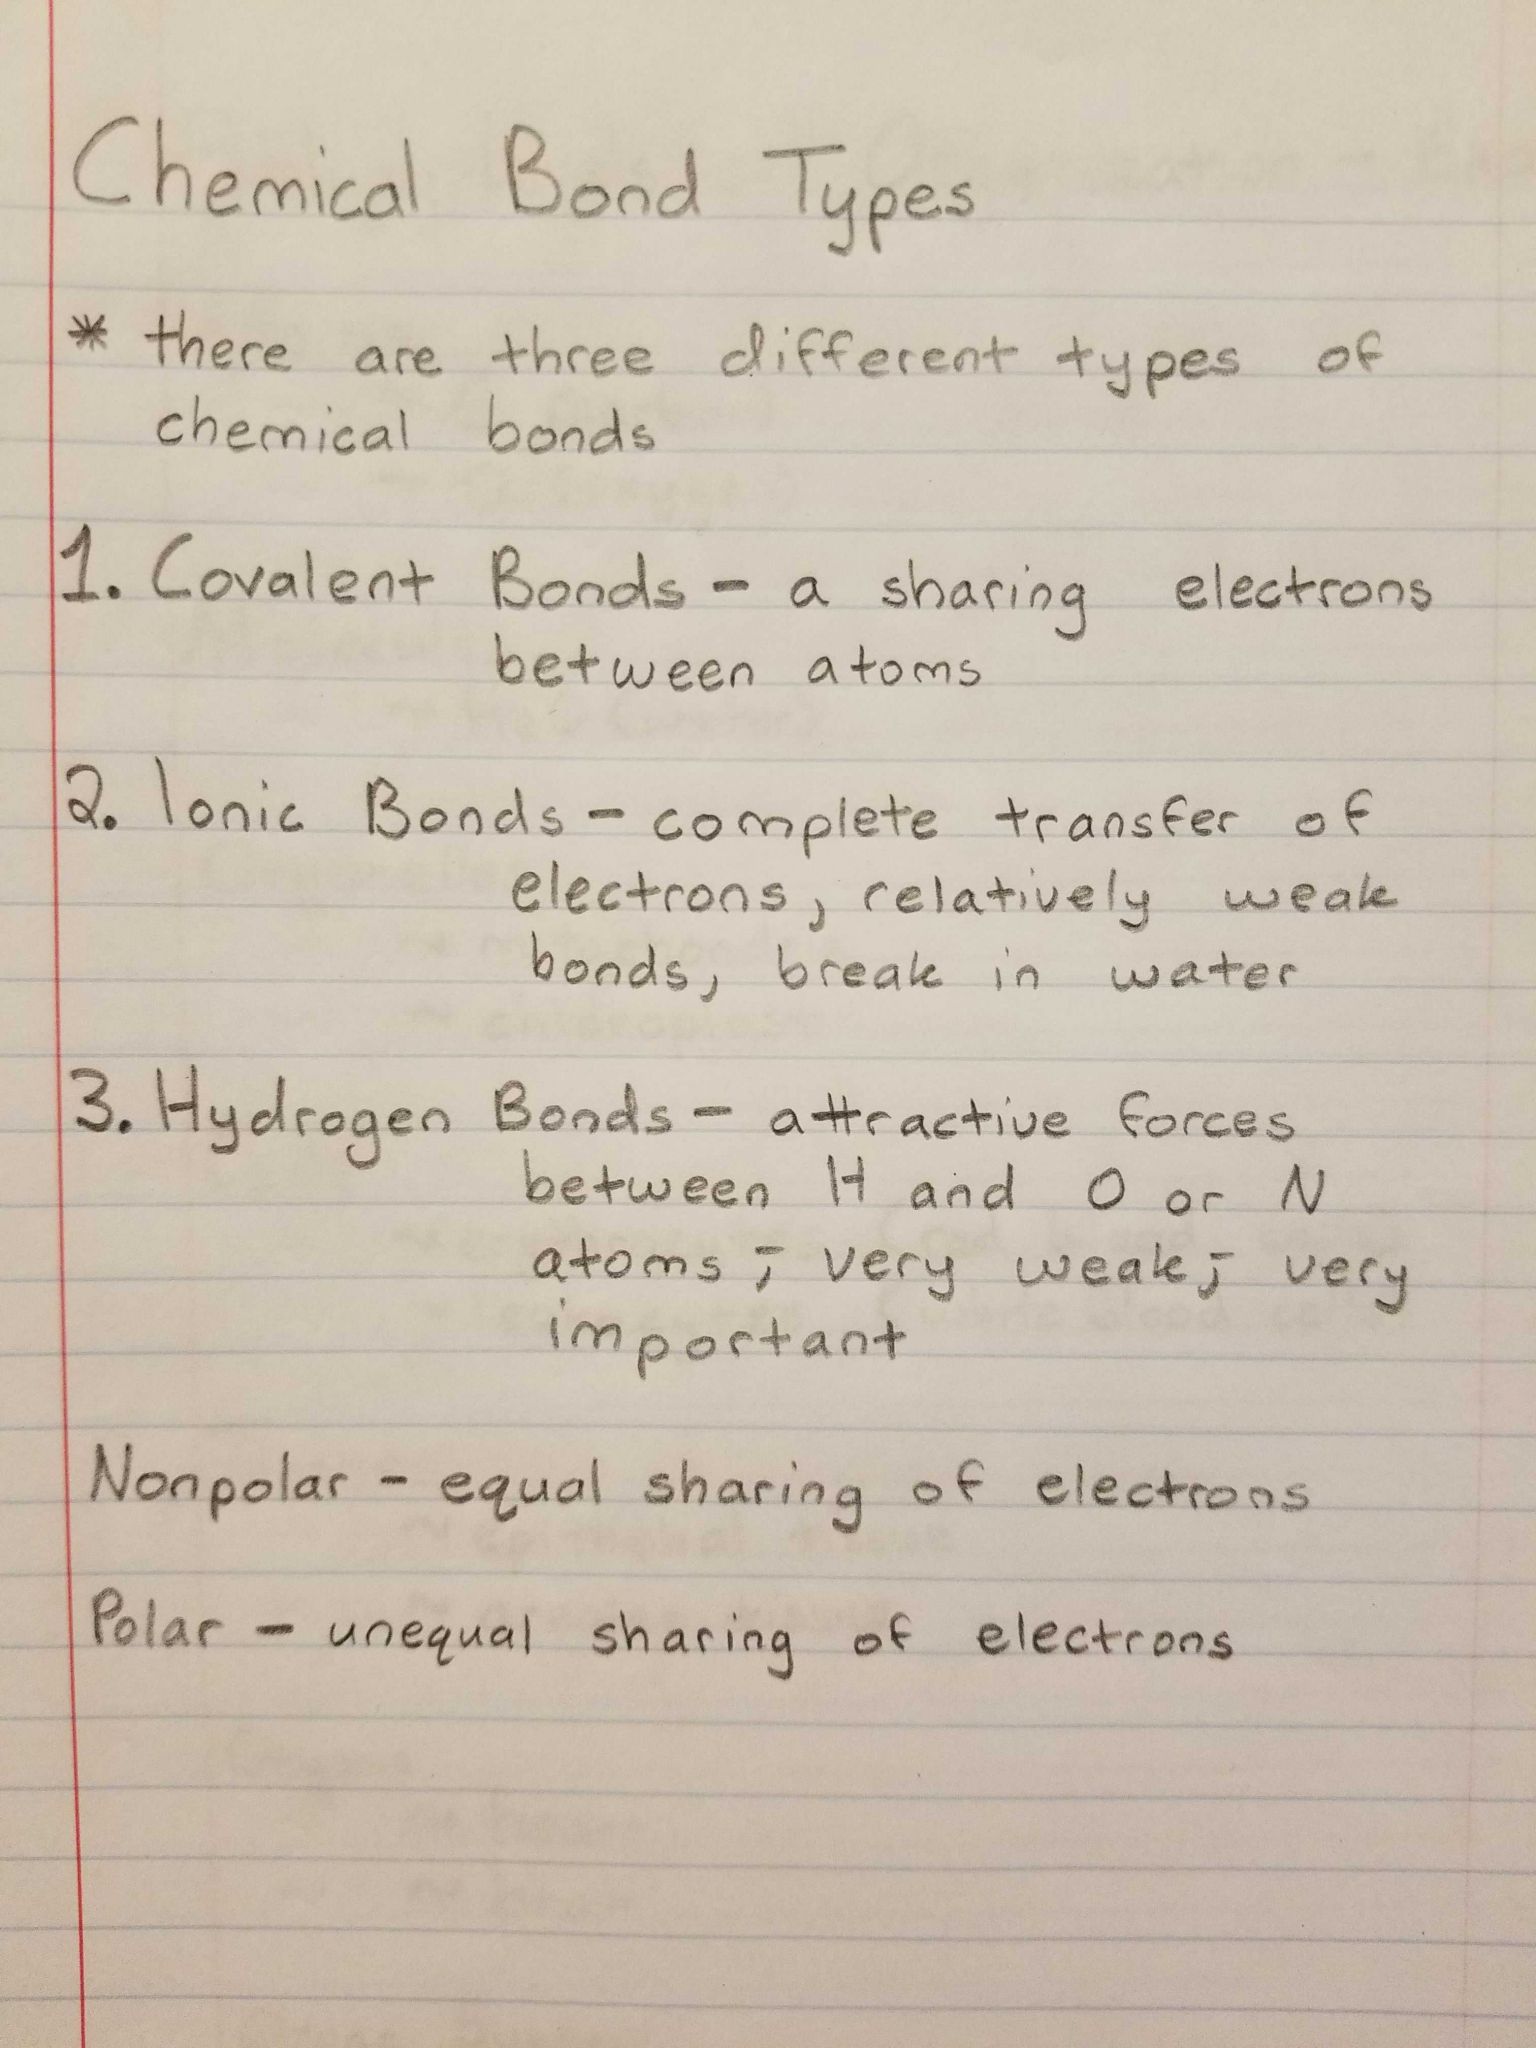 Types Of Chemical Bonds Worksheet together with Chemical Bond Types Health Science Notes Pinterest